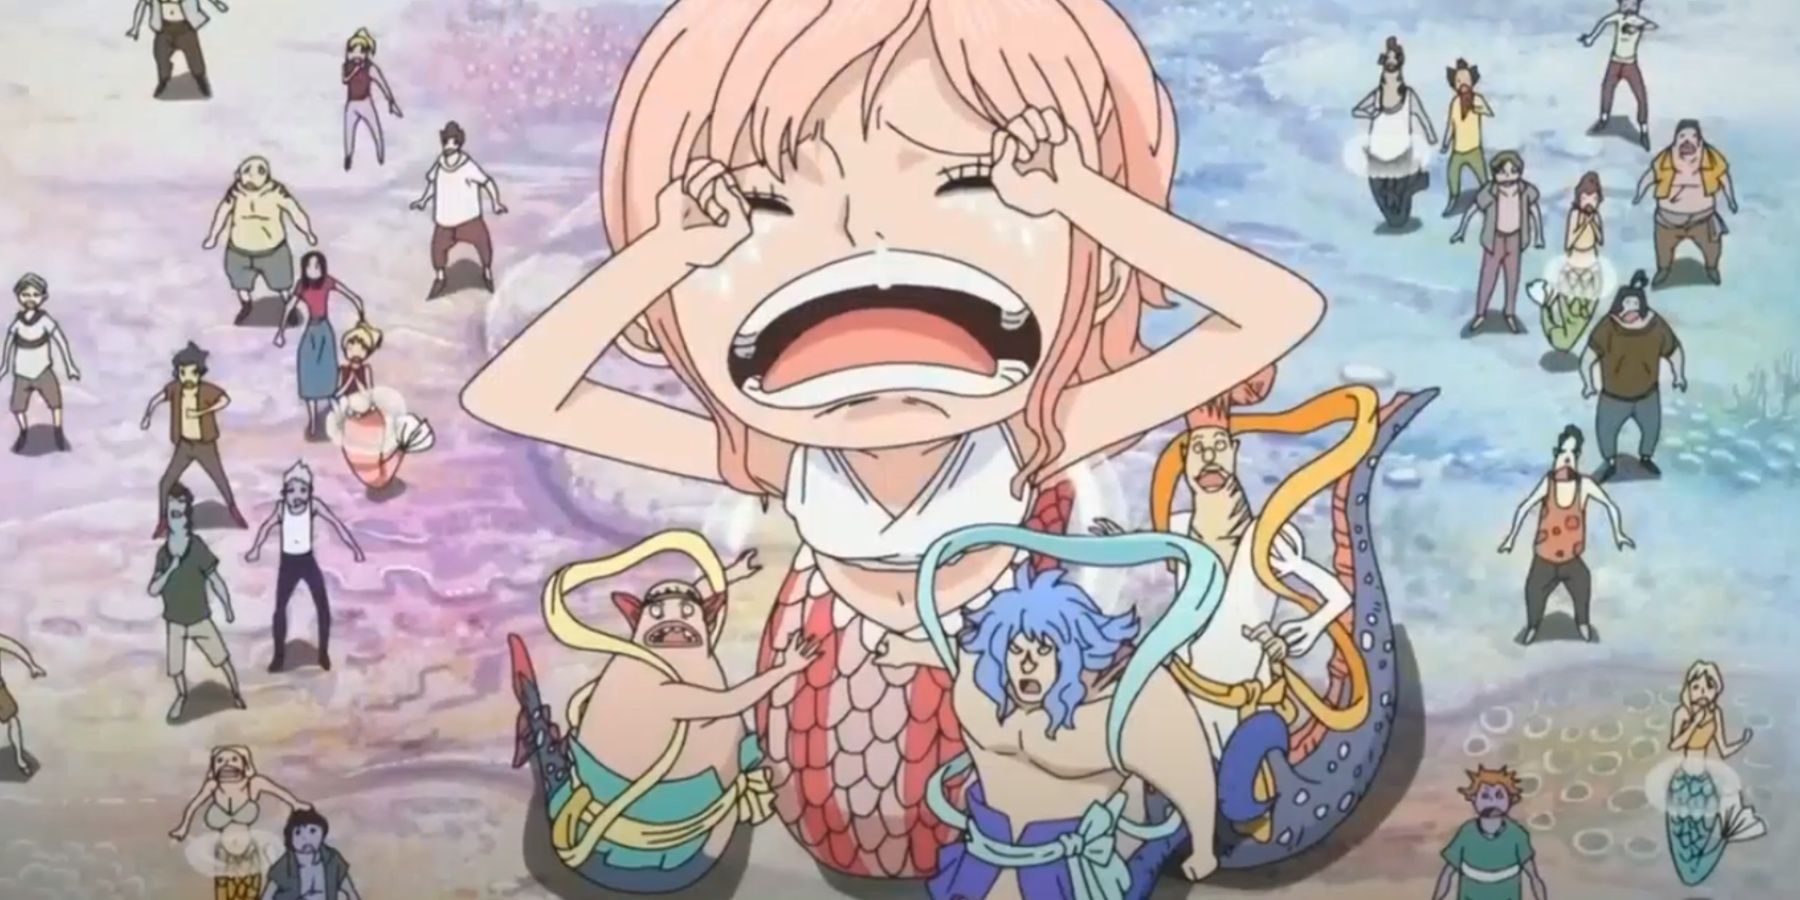 Young Shirahoshi crying over her mother's safety in One Piece